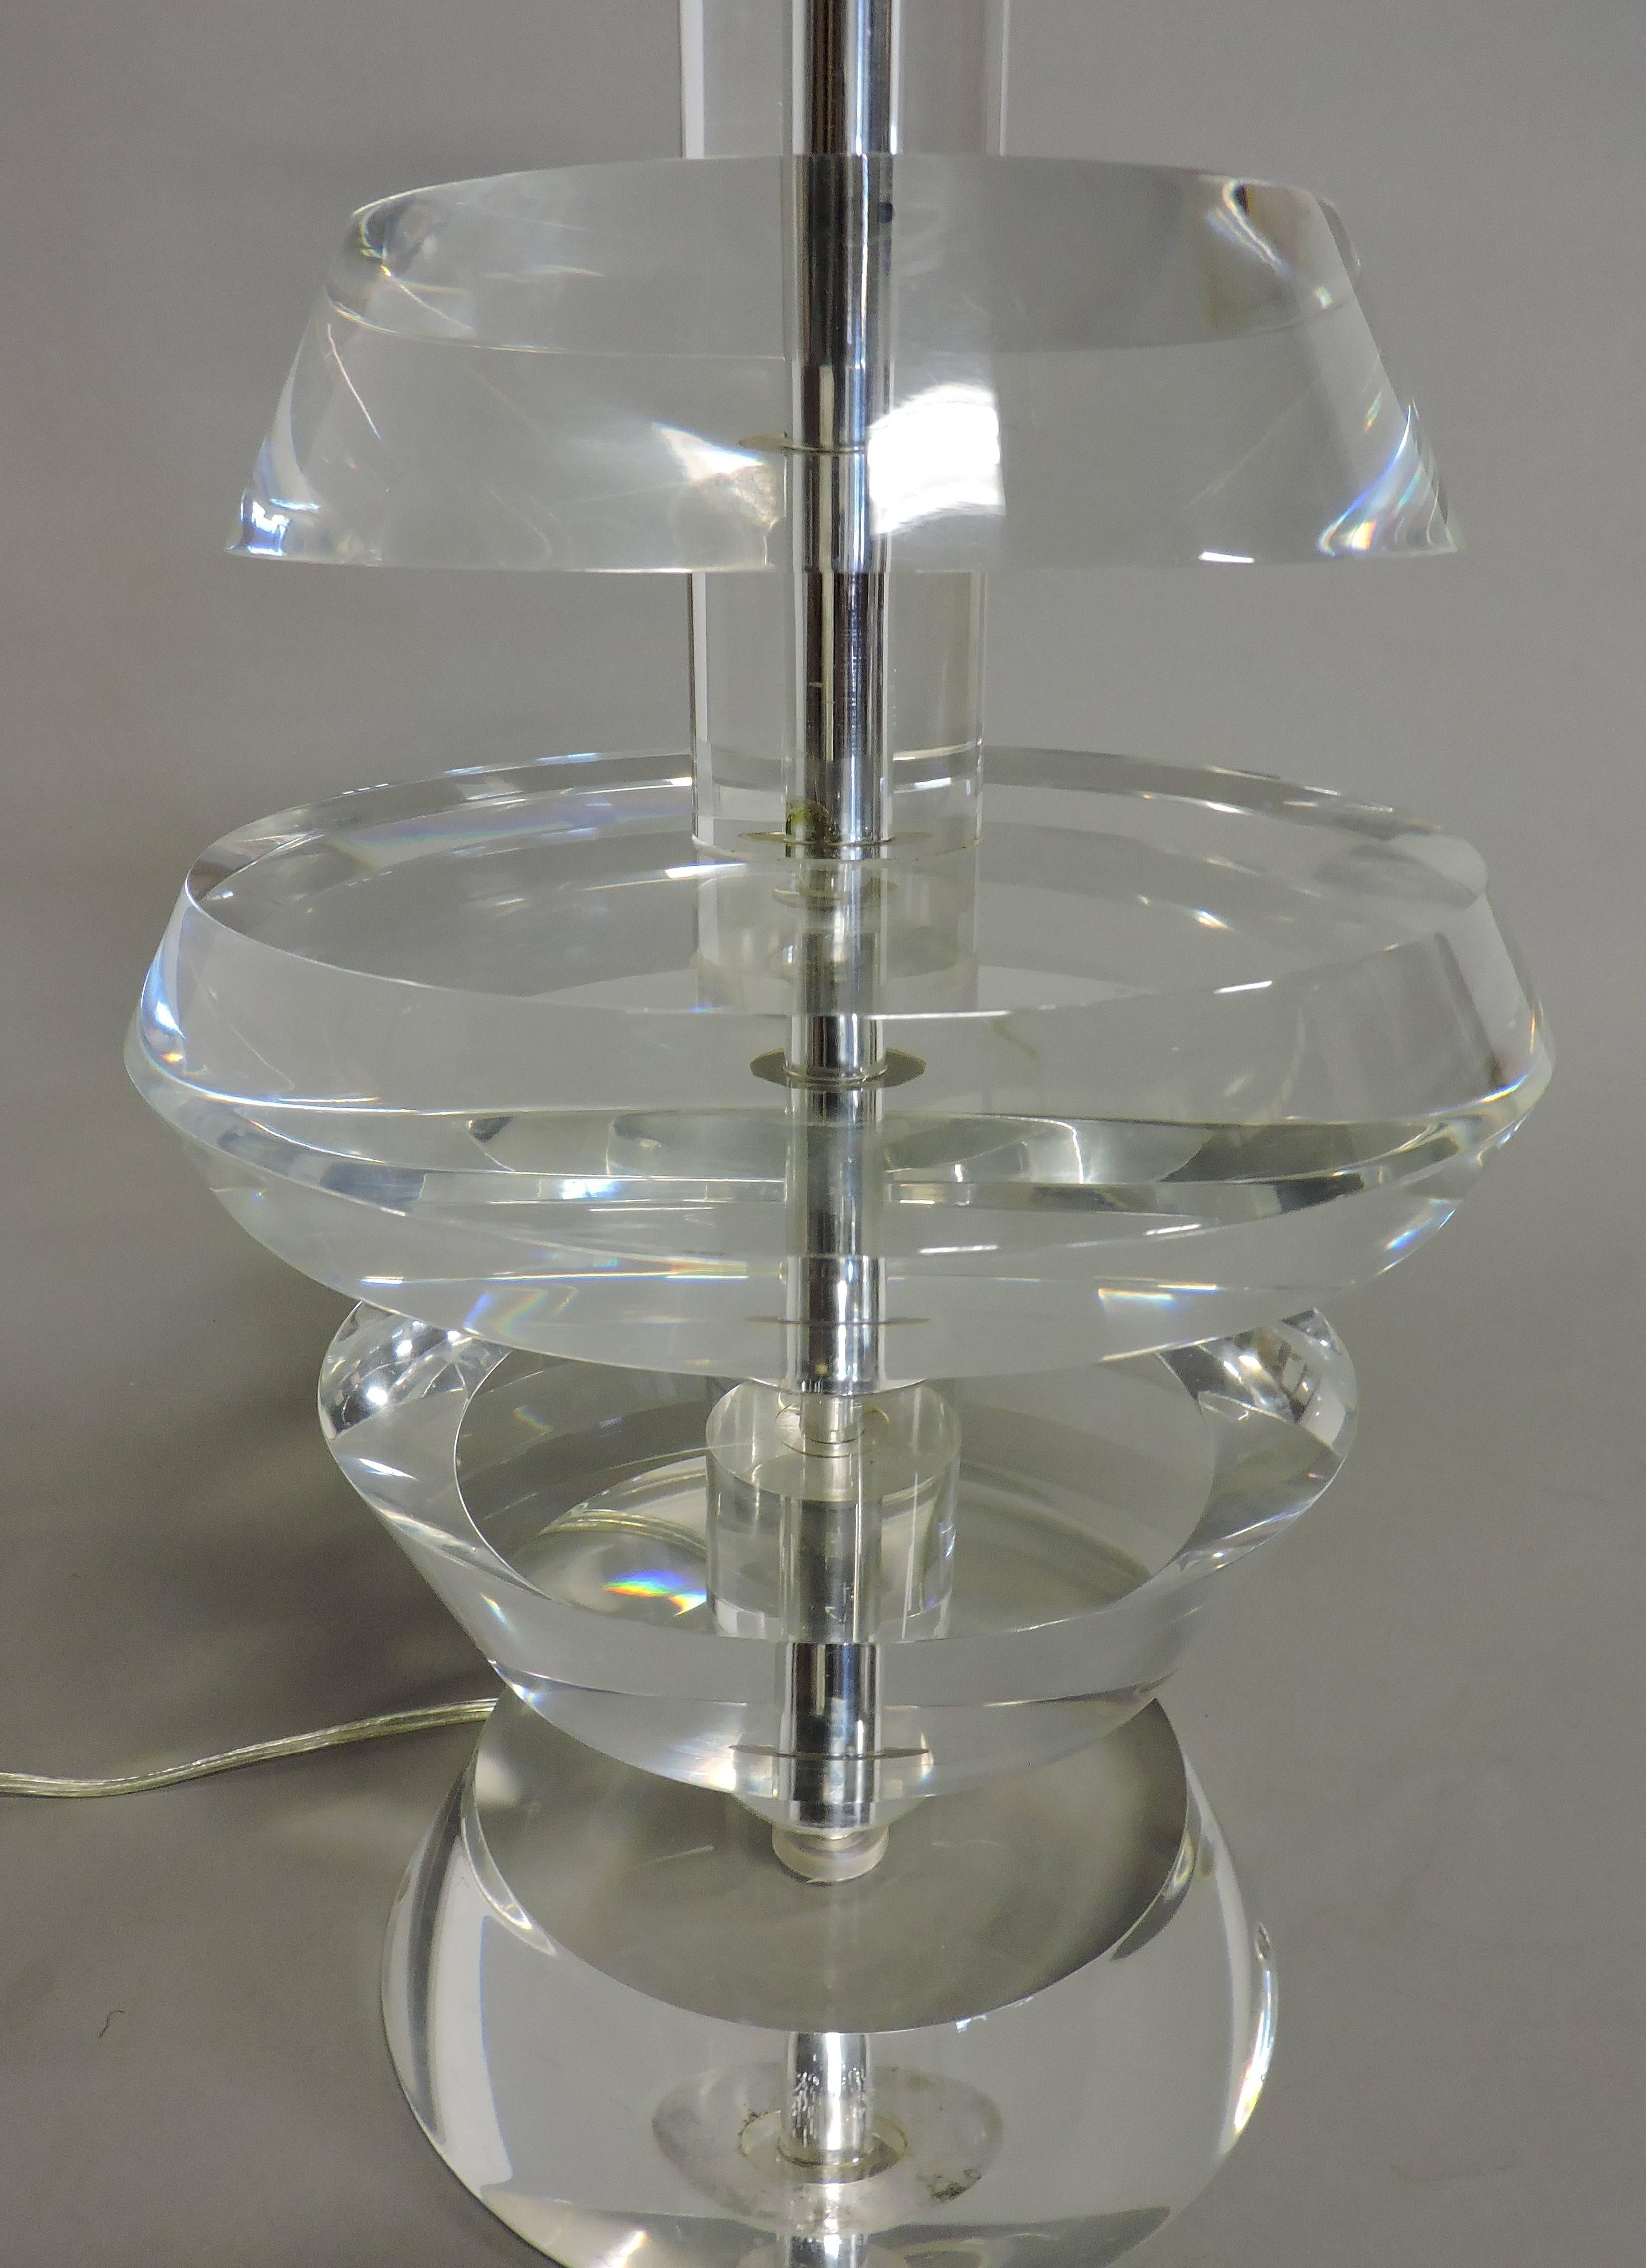 Karl Springer Style Mid-Century Modern Stacked Lucite and Chrome Table Lamp In Good Condition For Sale In Chesterfield, NJ